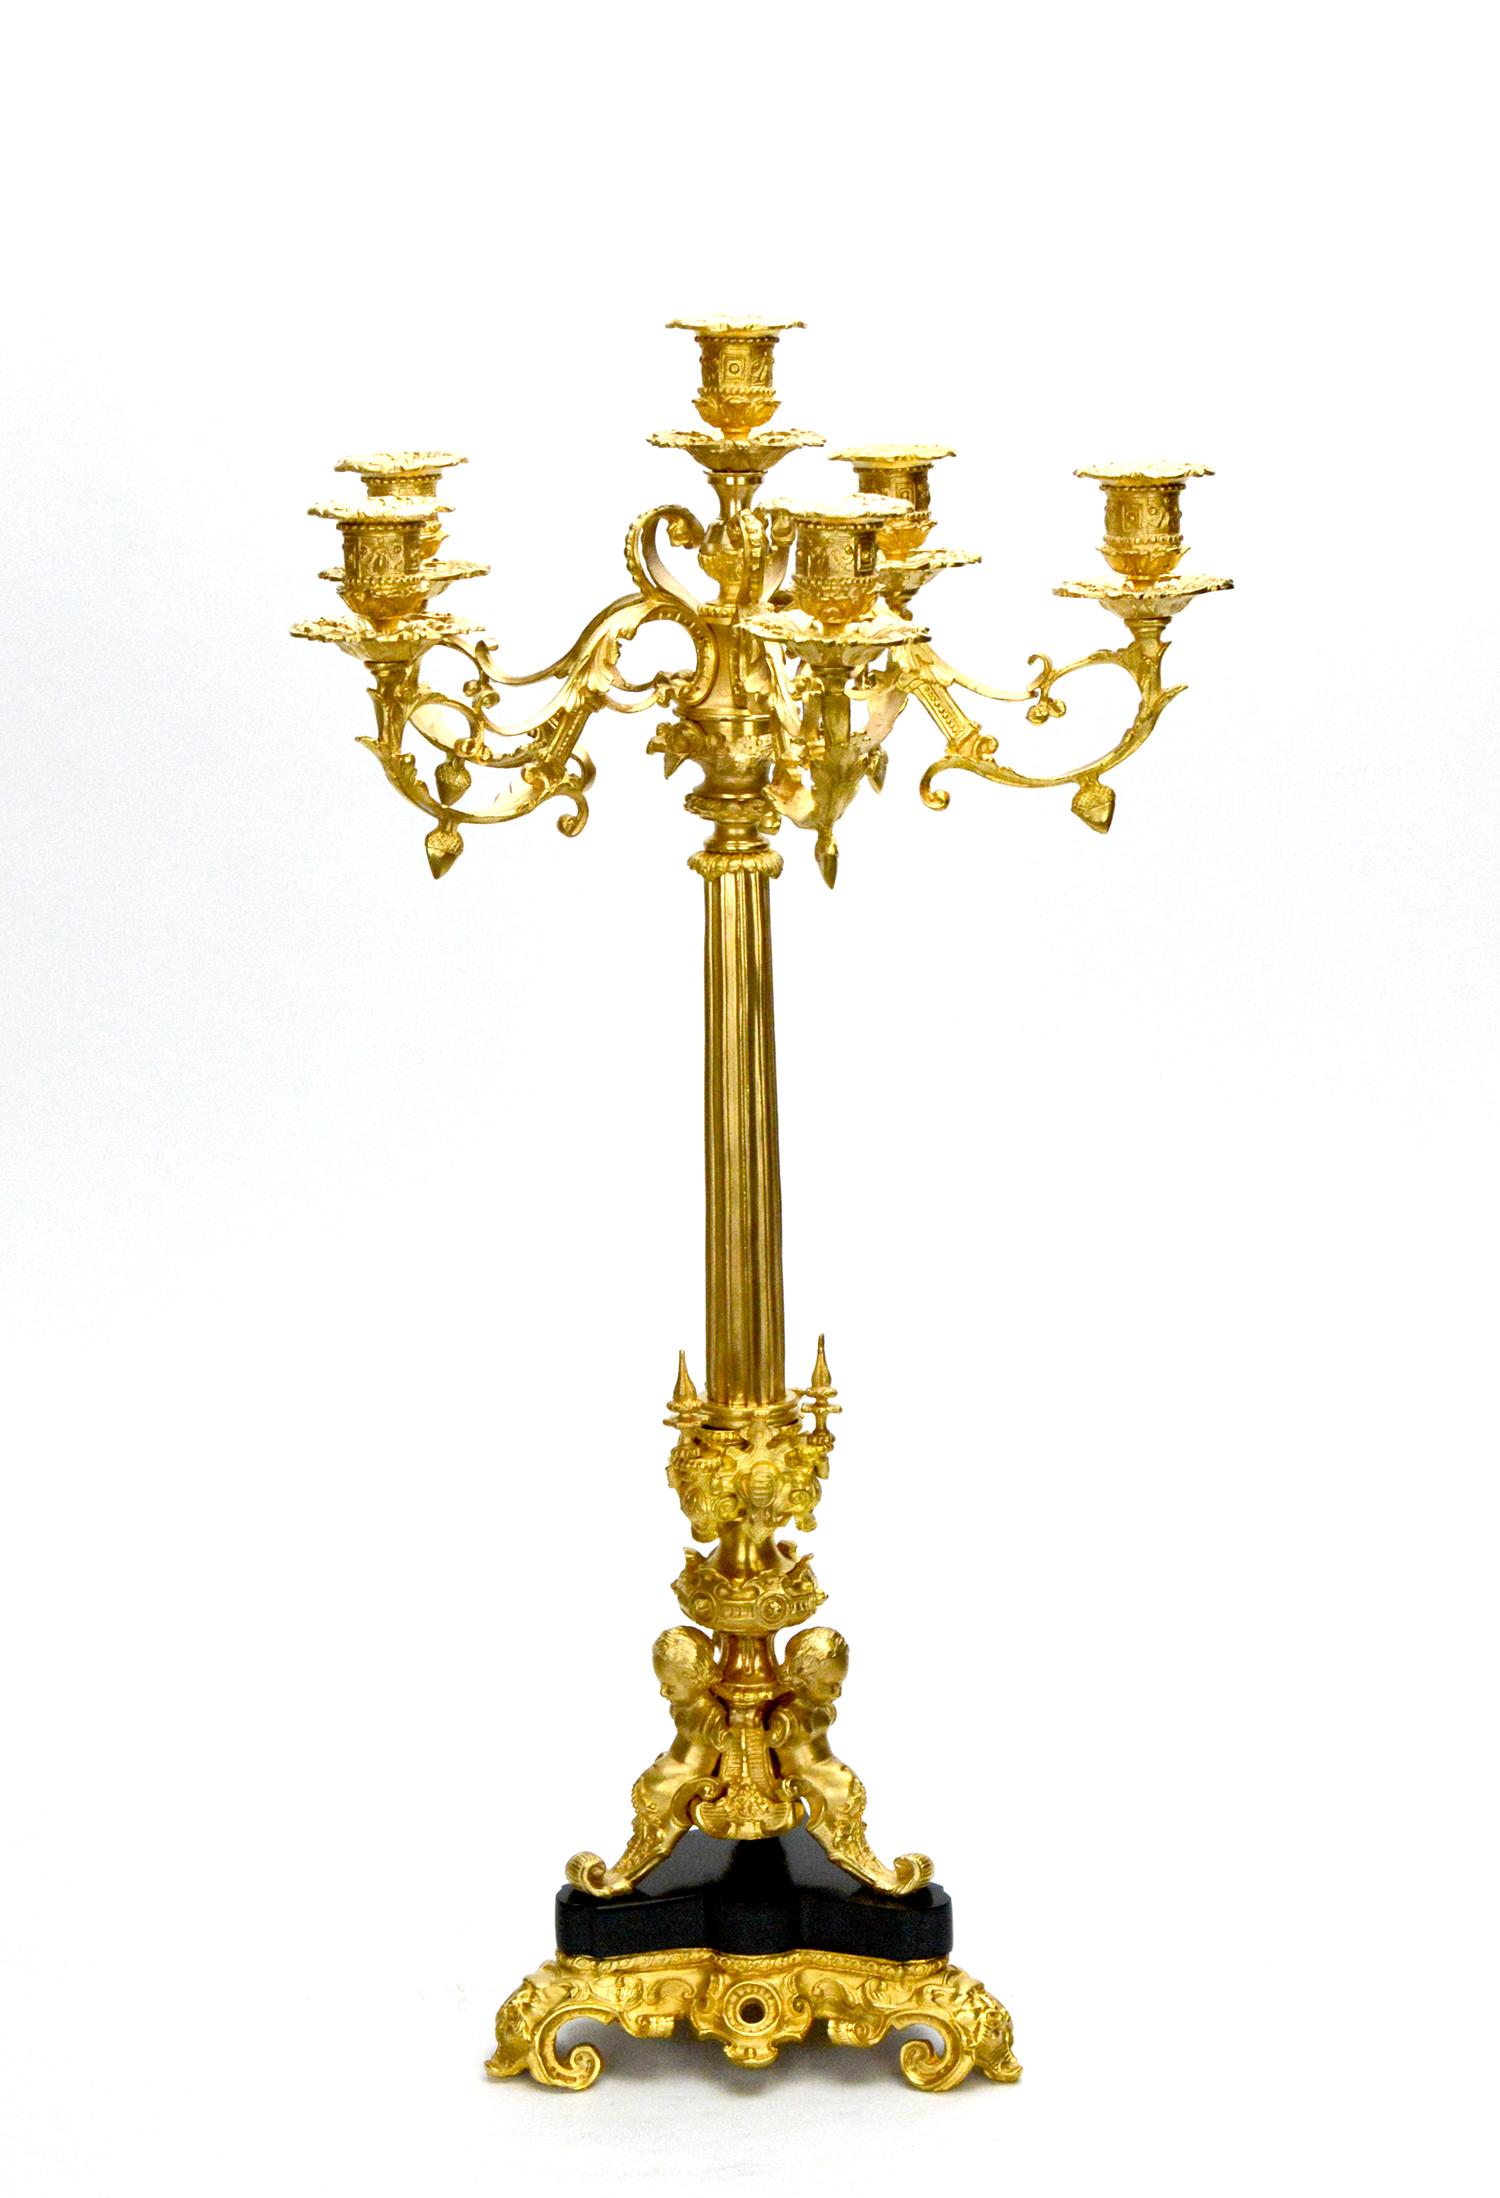 Pair of 6 Light Gold Plated Cherub Marble Empire Bronze Candelabra In Excellent Condition For Sale In Danville, CA